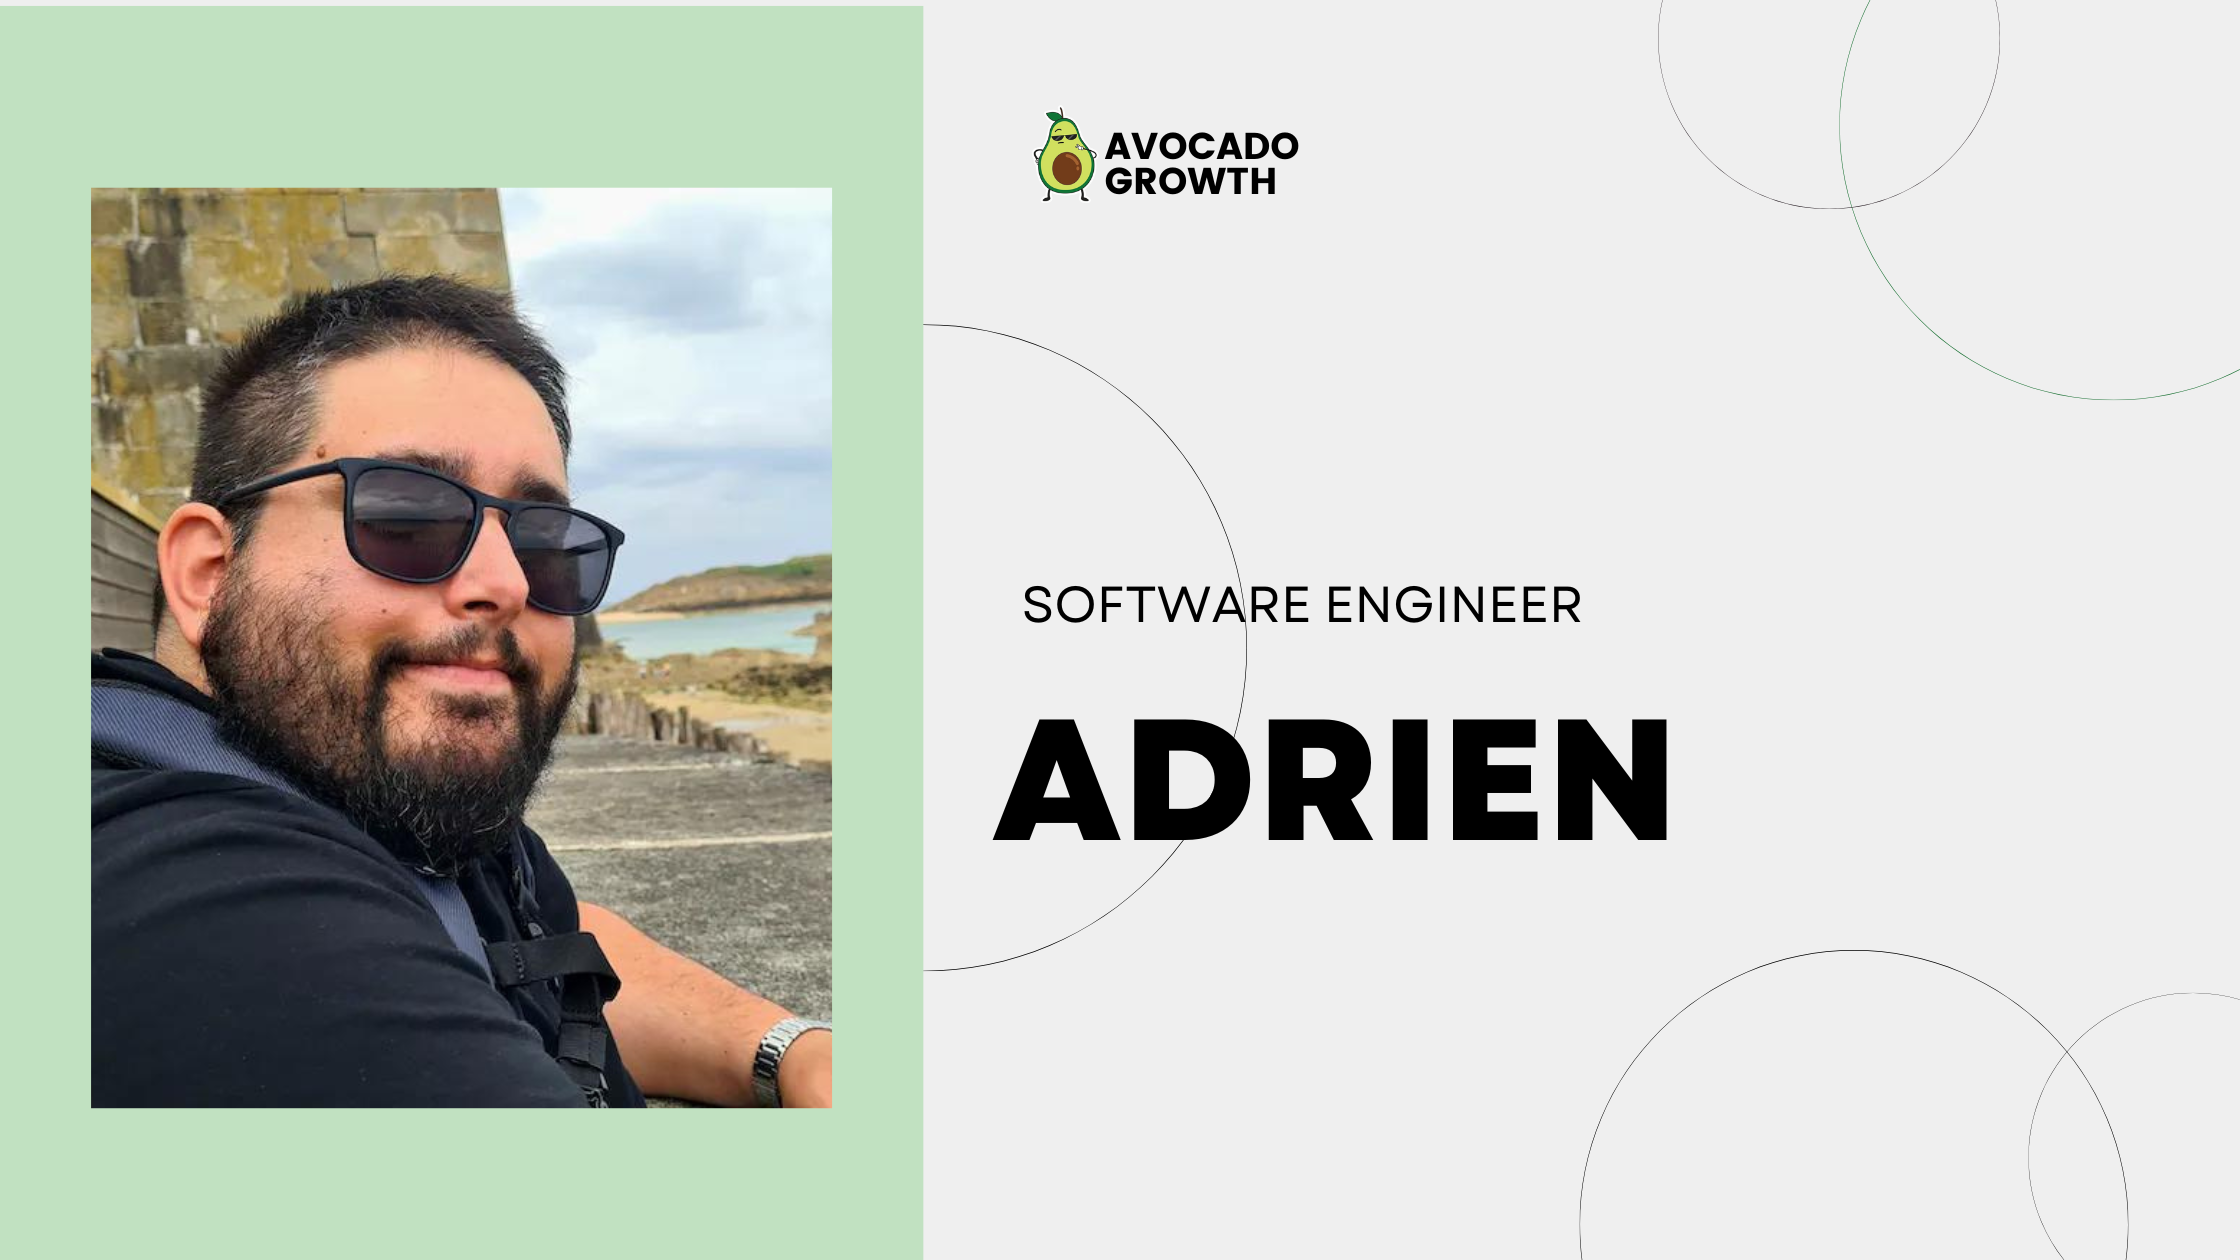 Cover Image for Portrait of Adrien, software engineer and mentor on Avocado growth